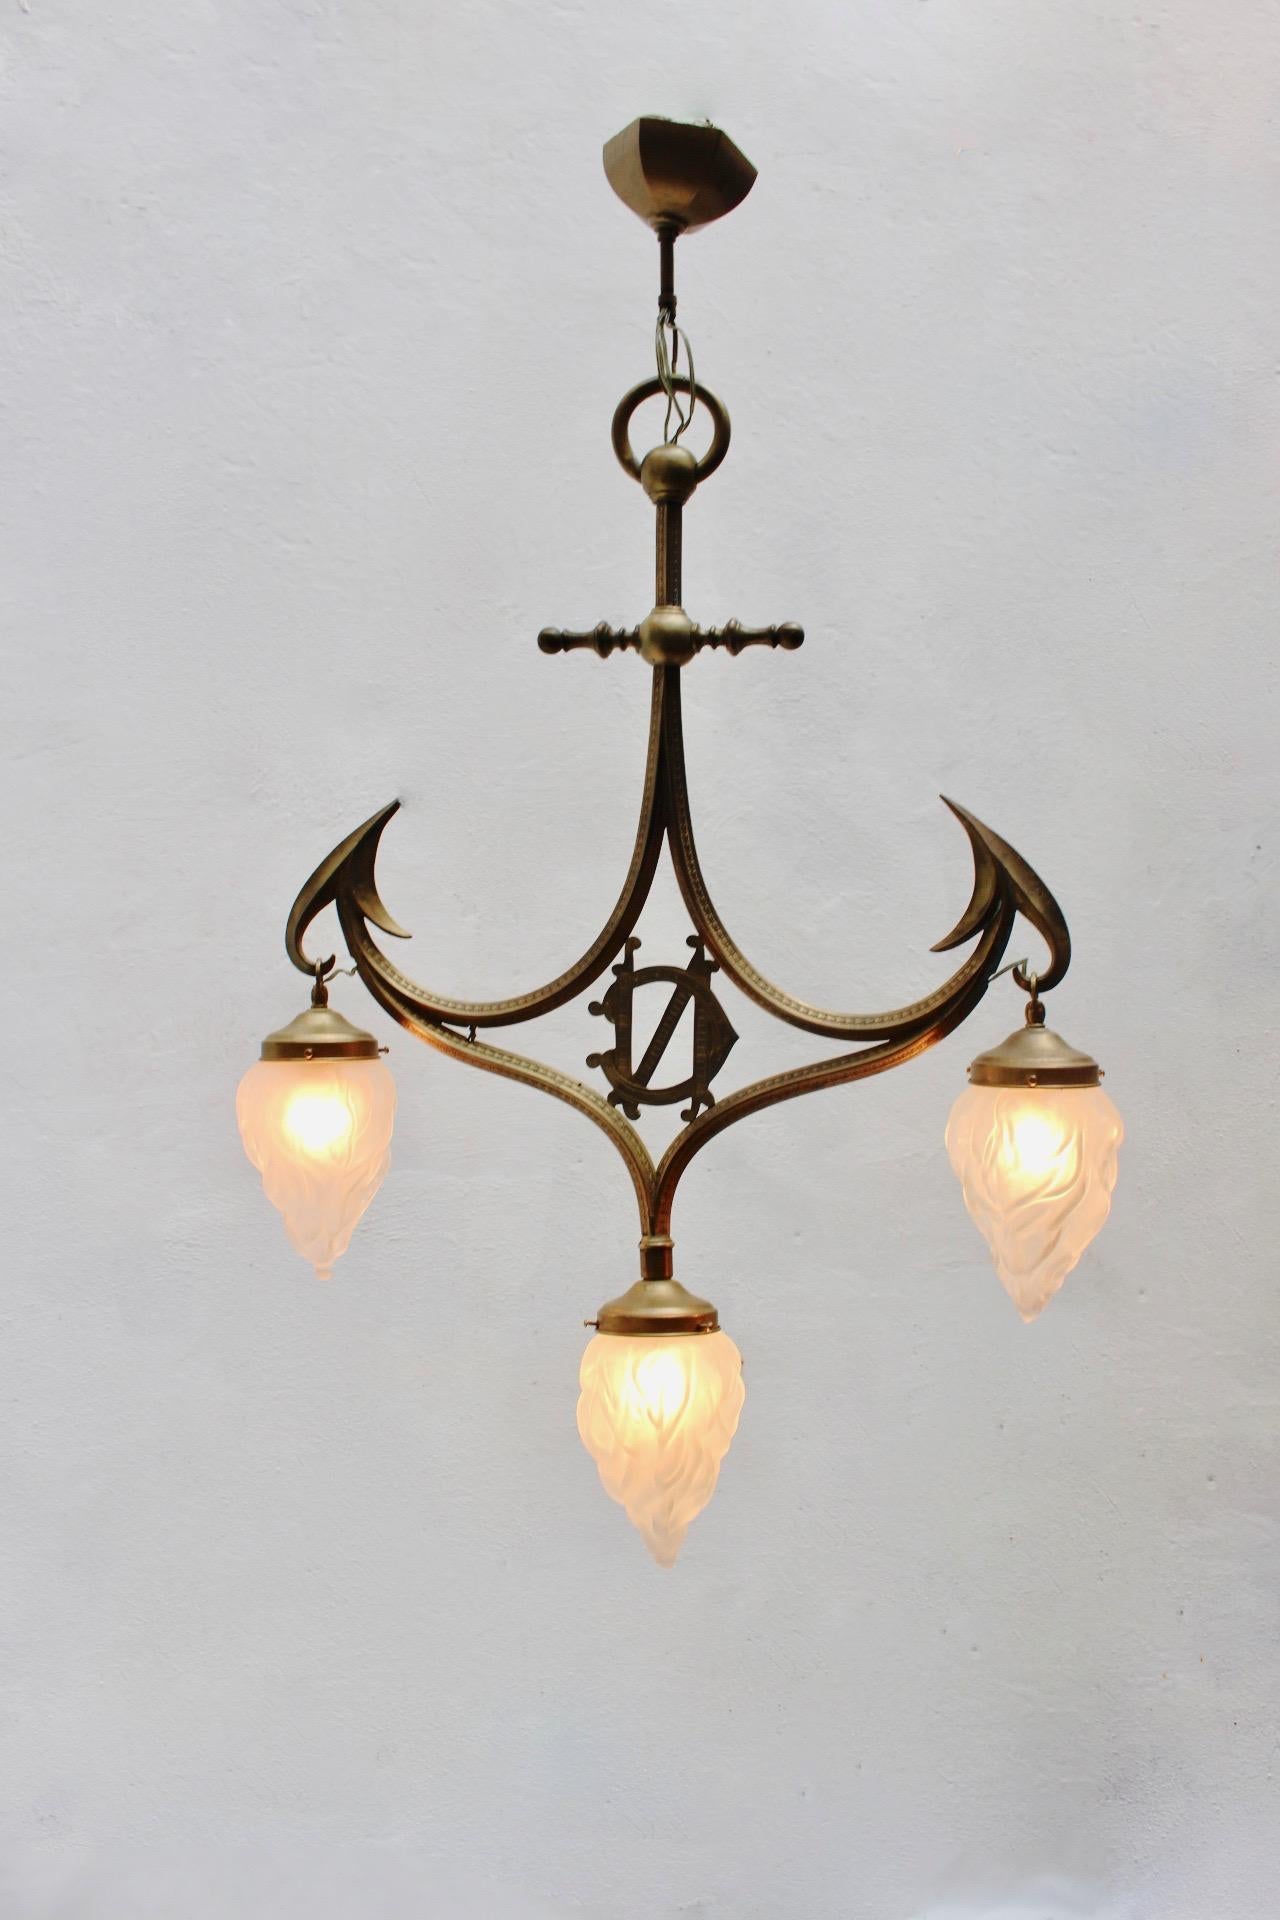 Art Nouveau Gothic Revival carved brass & glass 3-light pendant lamp, Spain, 1910s.
In very good condition with light patina due to age and use.
 